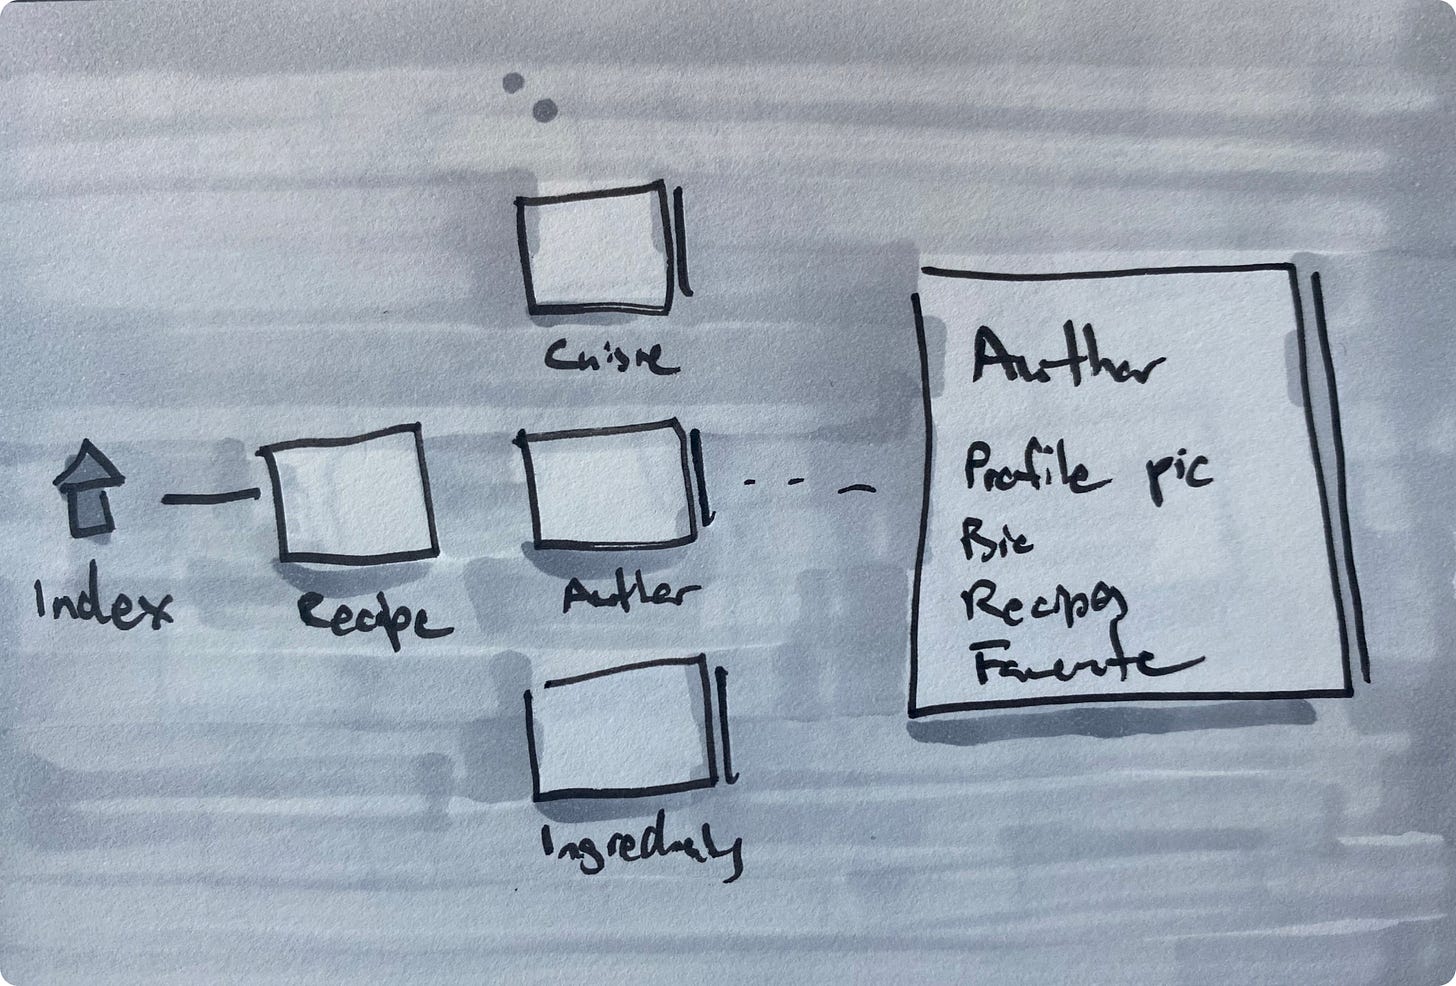 Sketch of content map